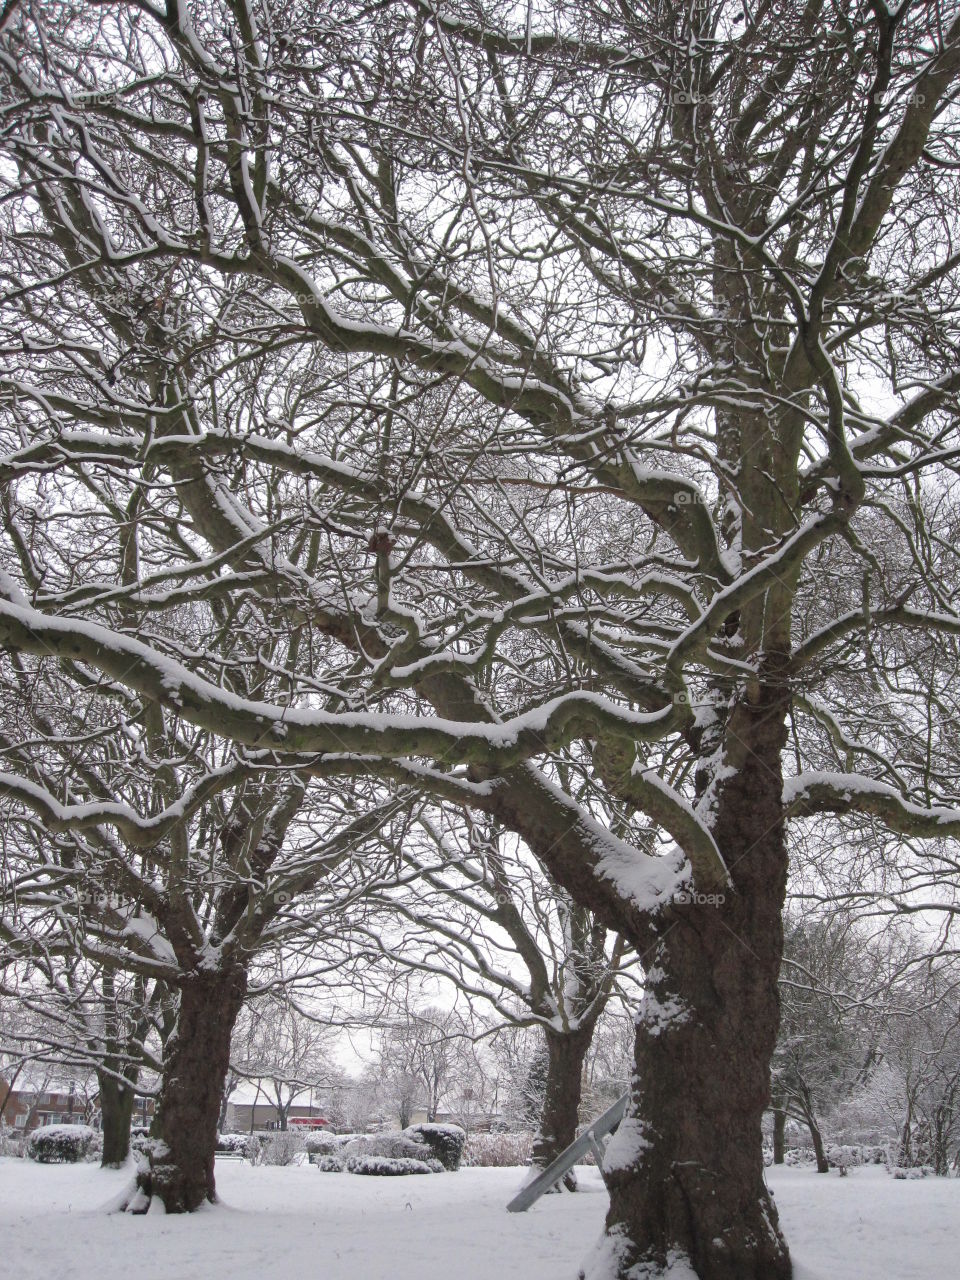 branches covered in snow